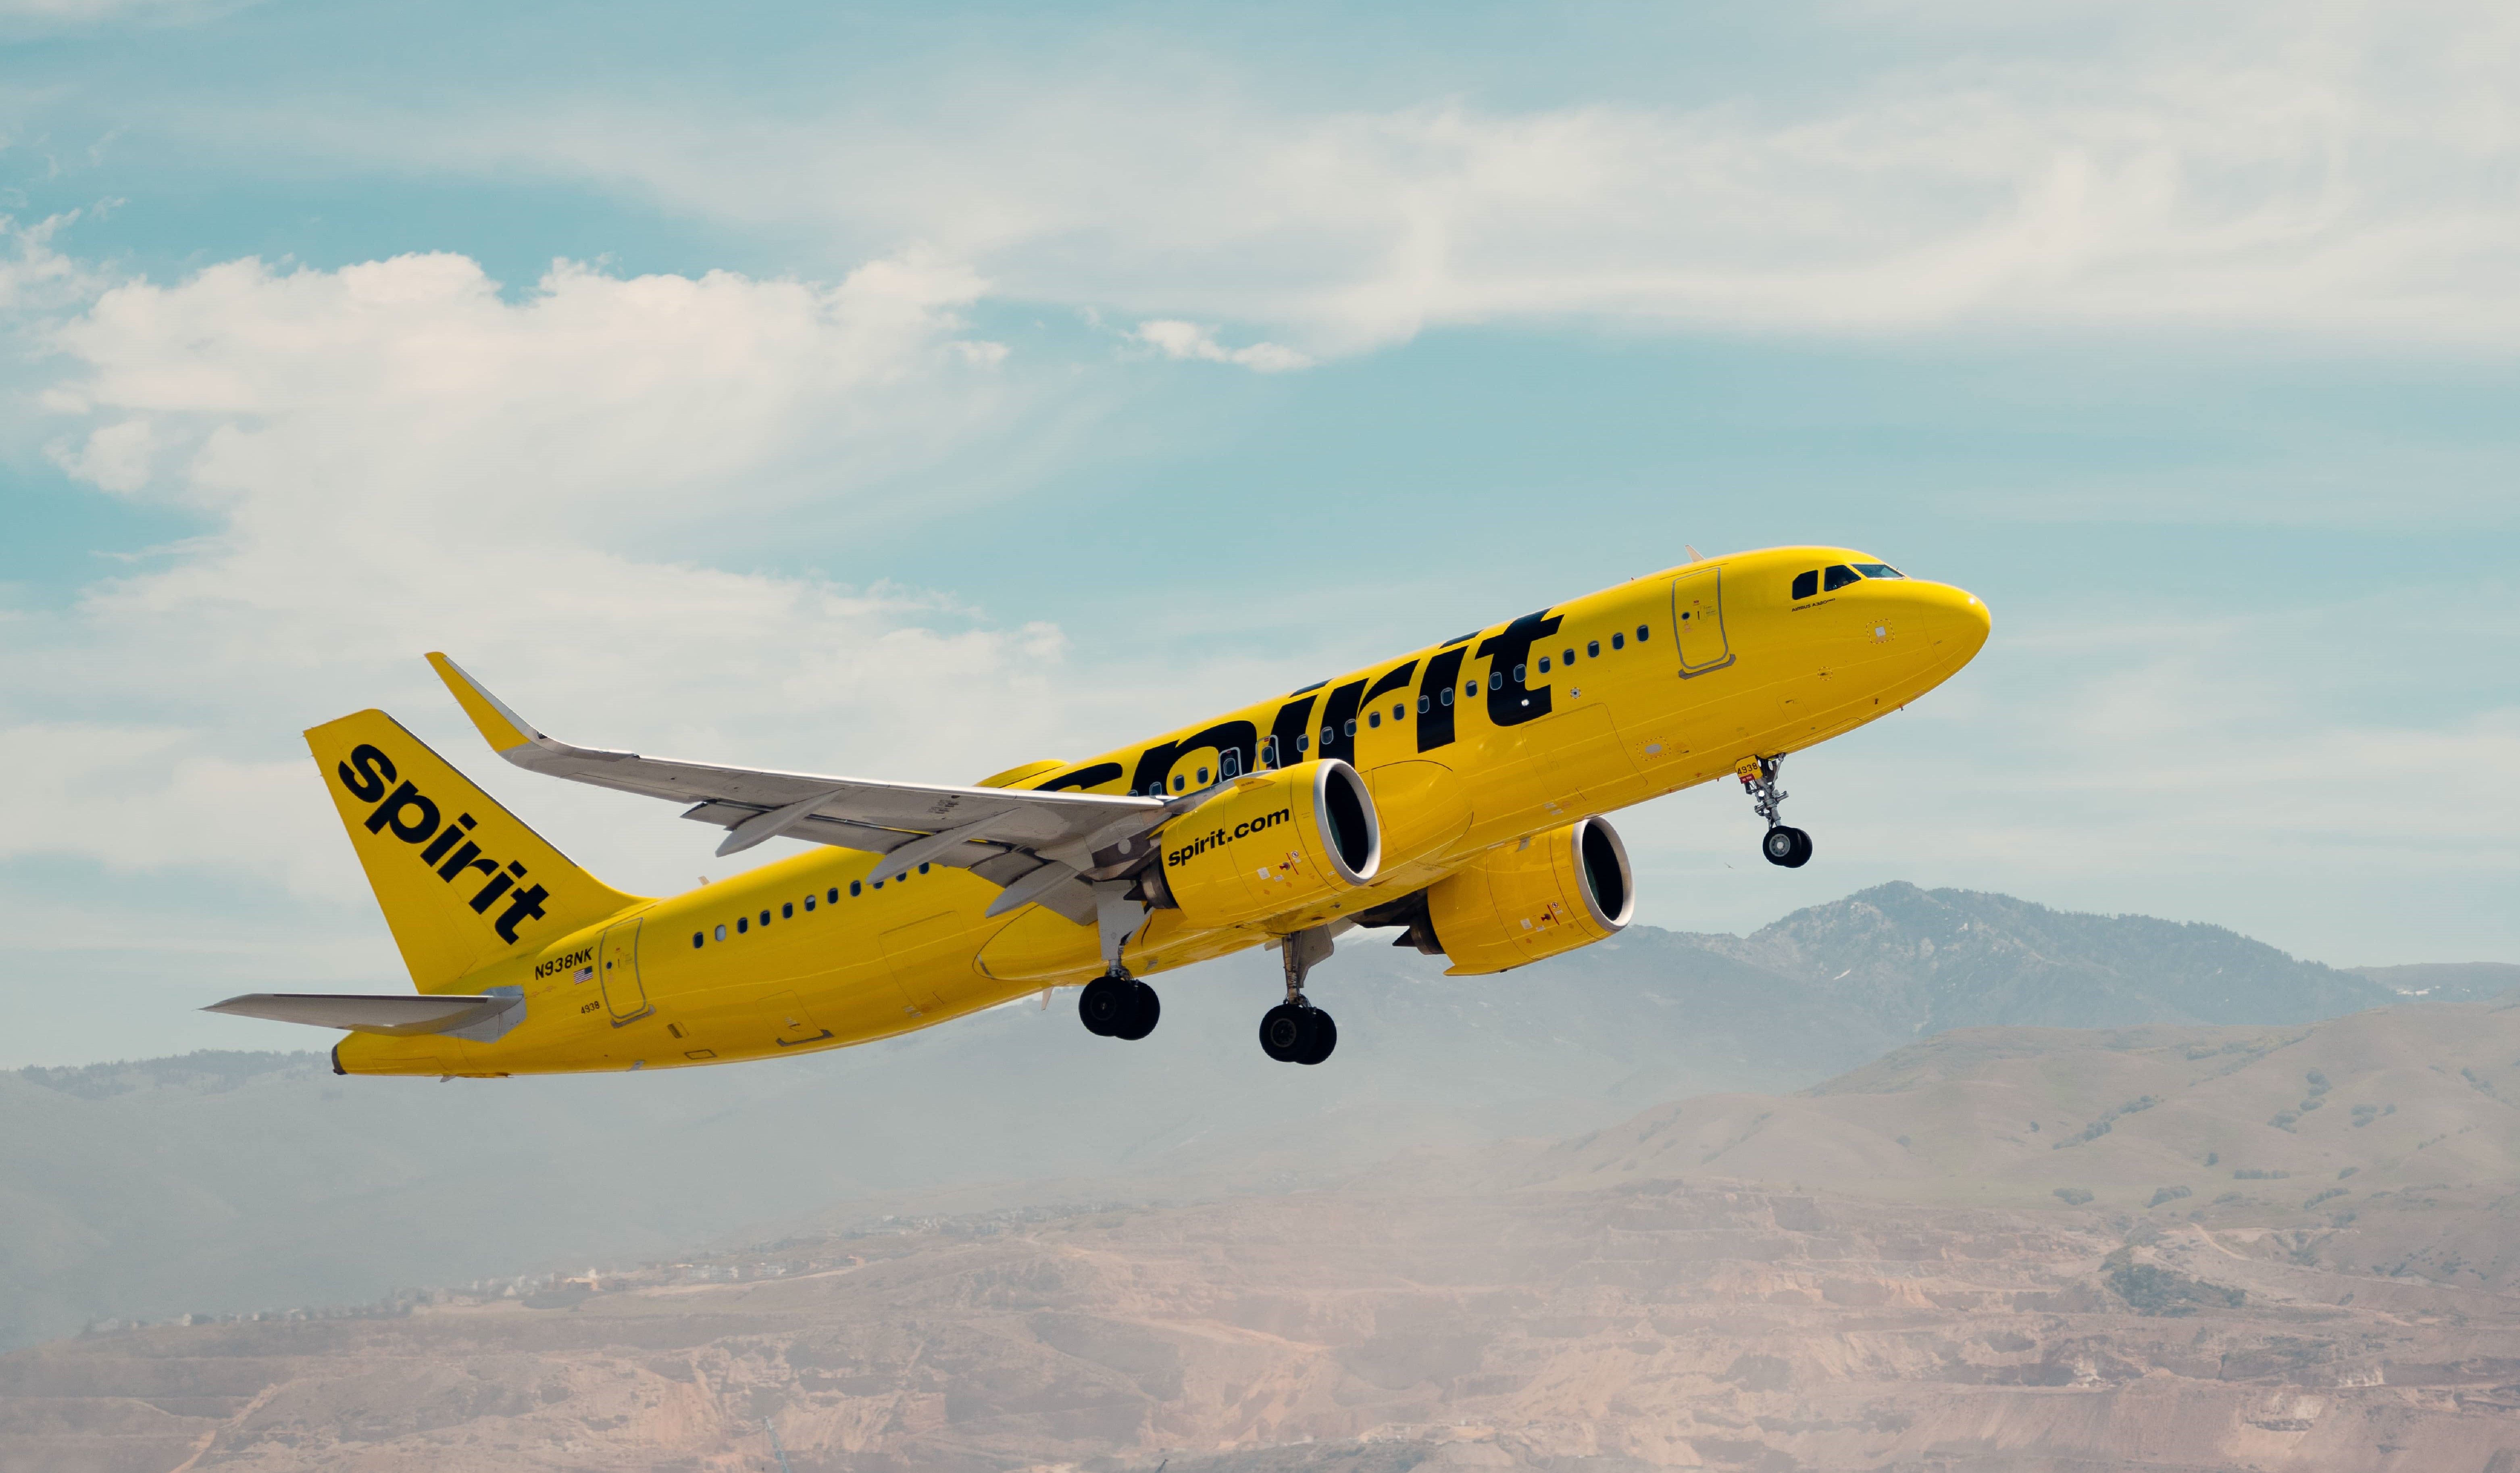 A Spirit Airlines Airbus A320 flying in the sky.